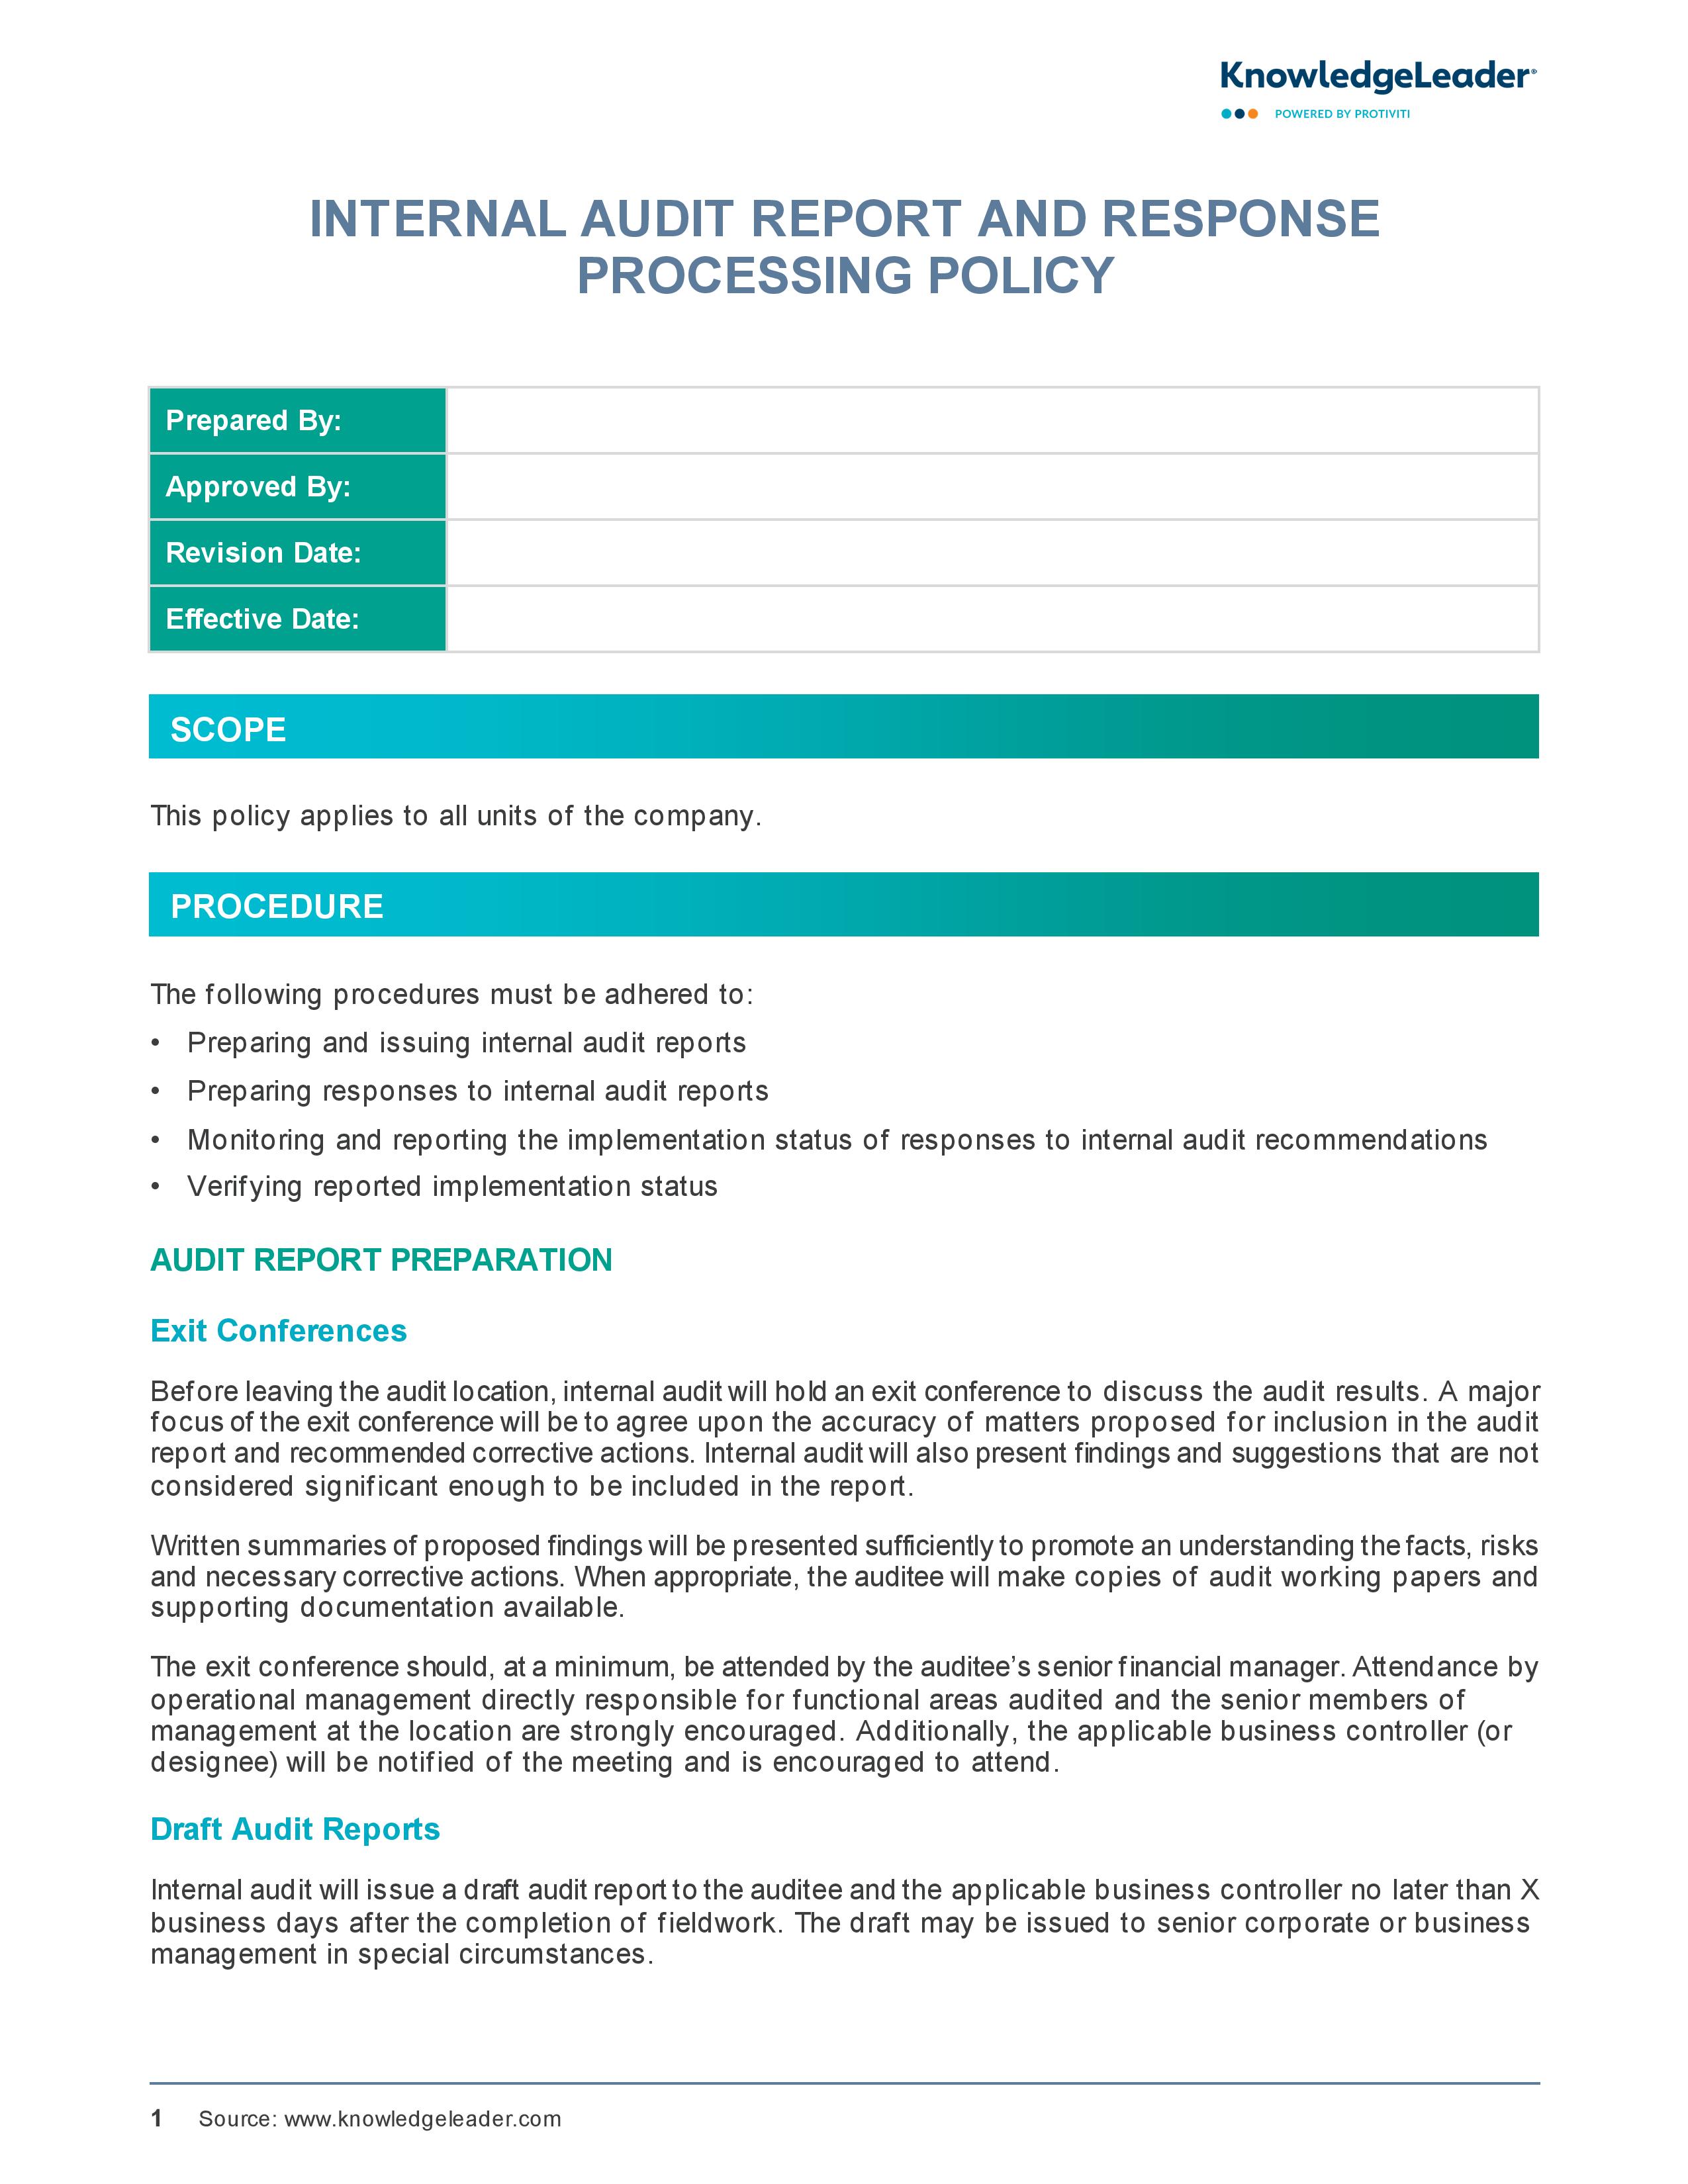 screenshot of the first page of Internal Audit Report and Response Processing Policy